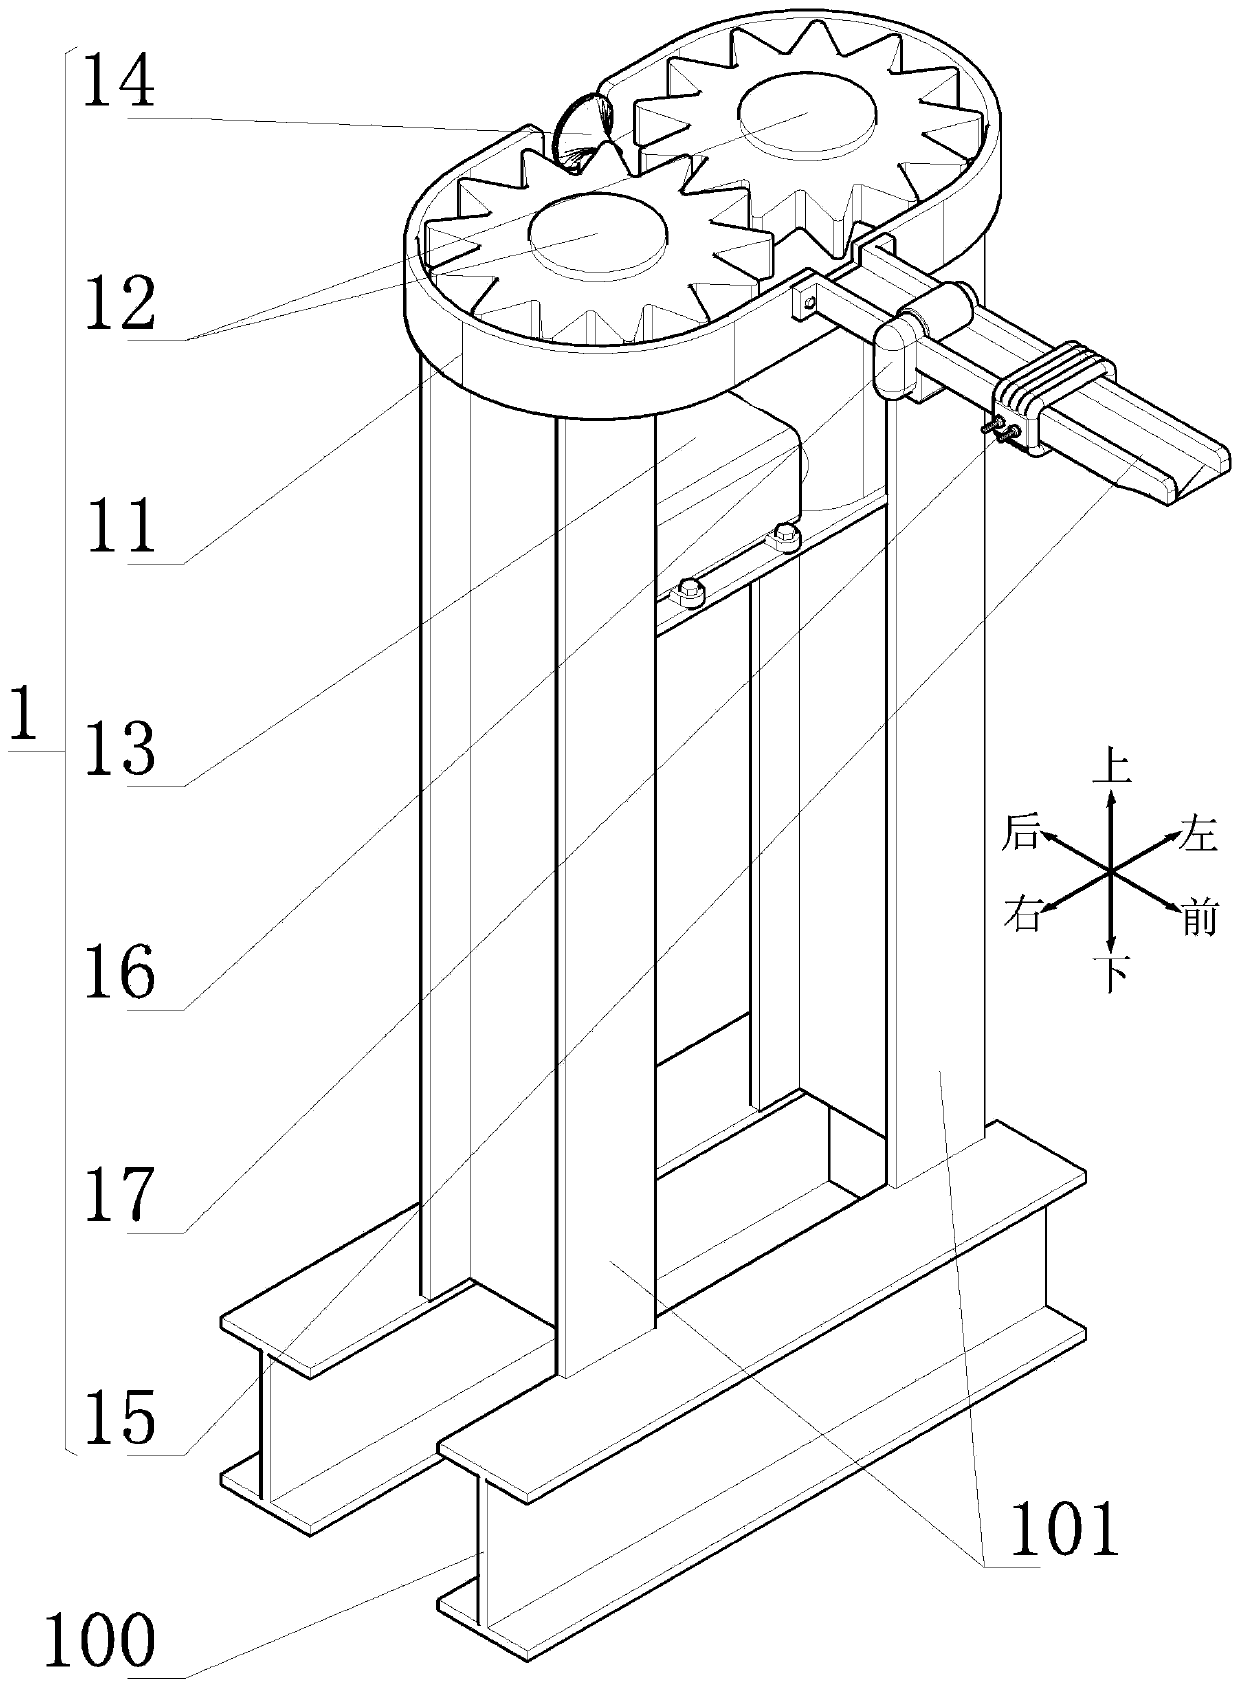 A wiring device for butt welding of ultra-high molecular weight polyethylene straight pipe and its working method